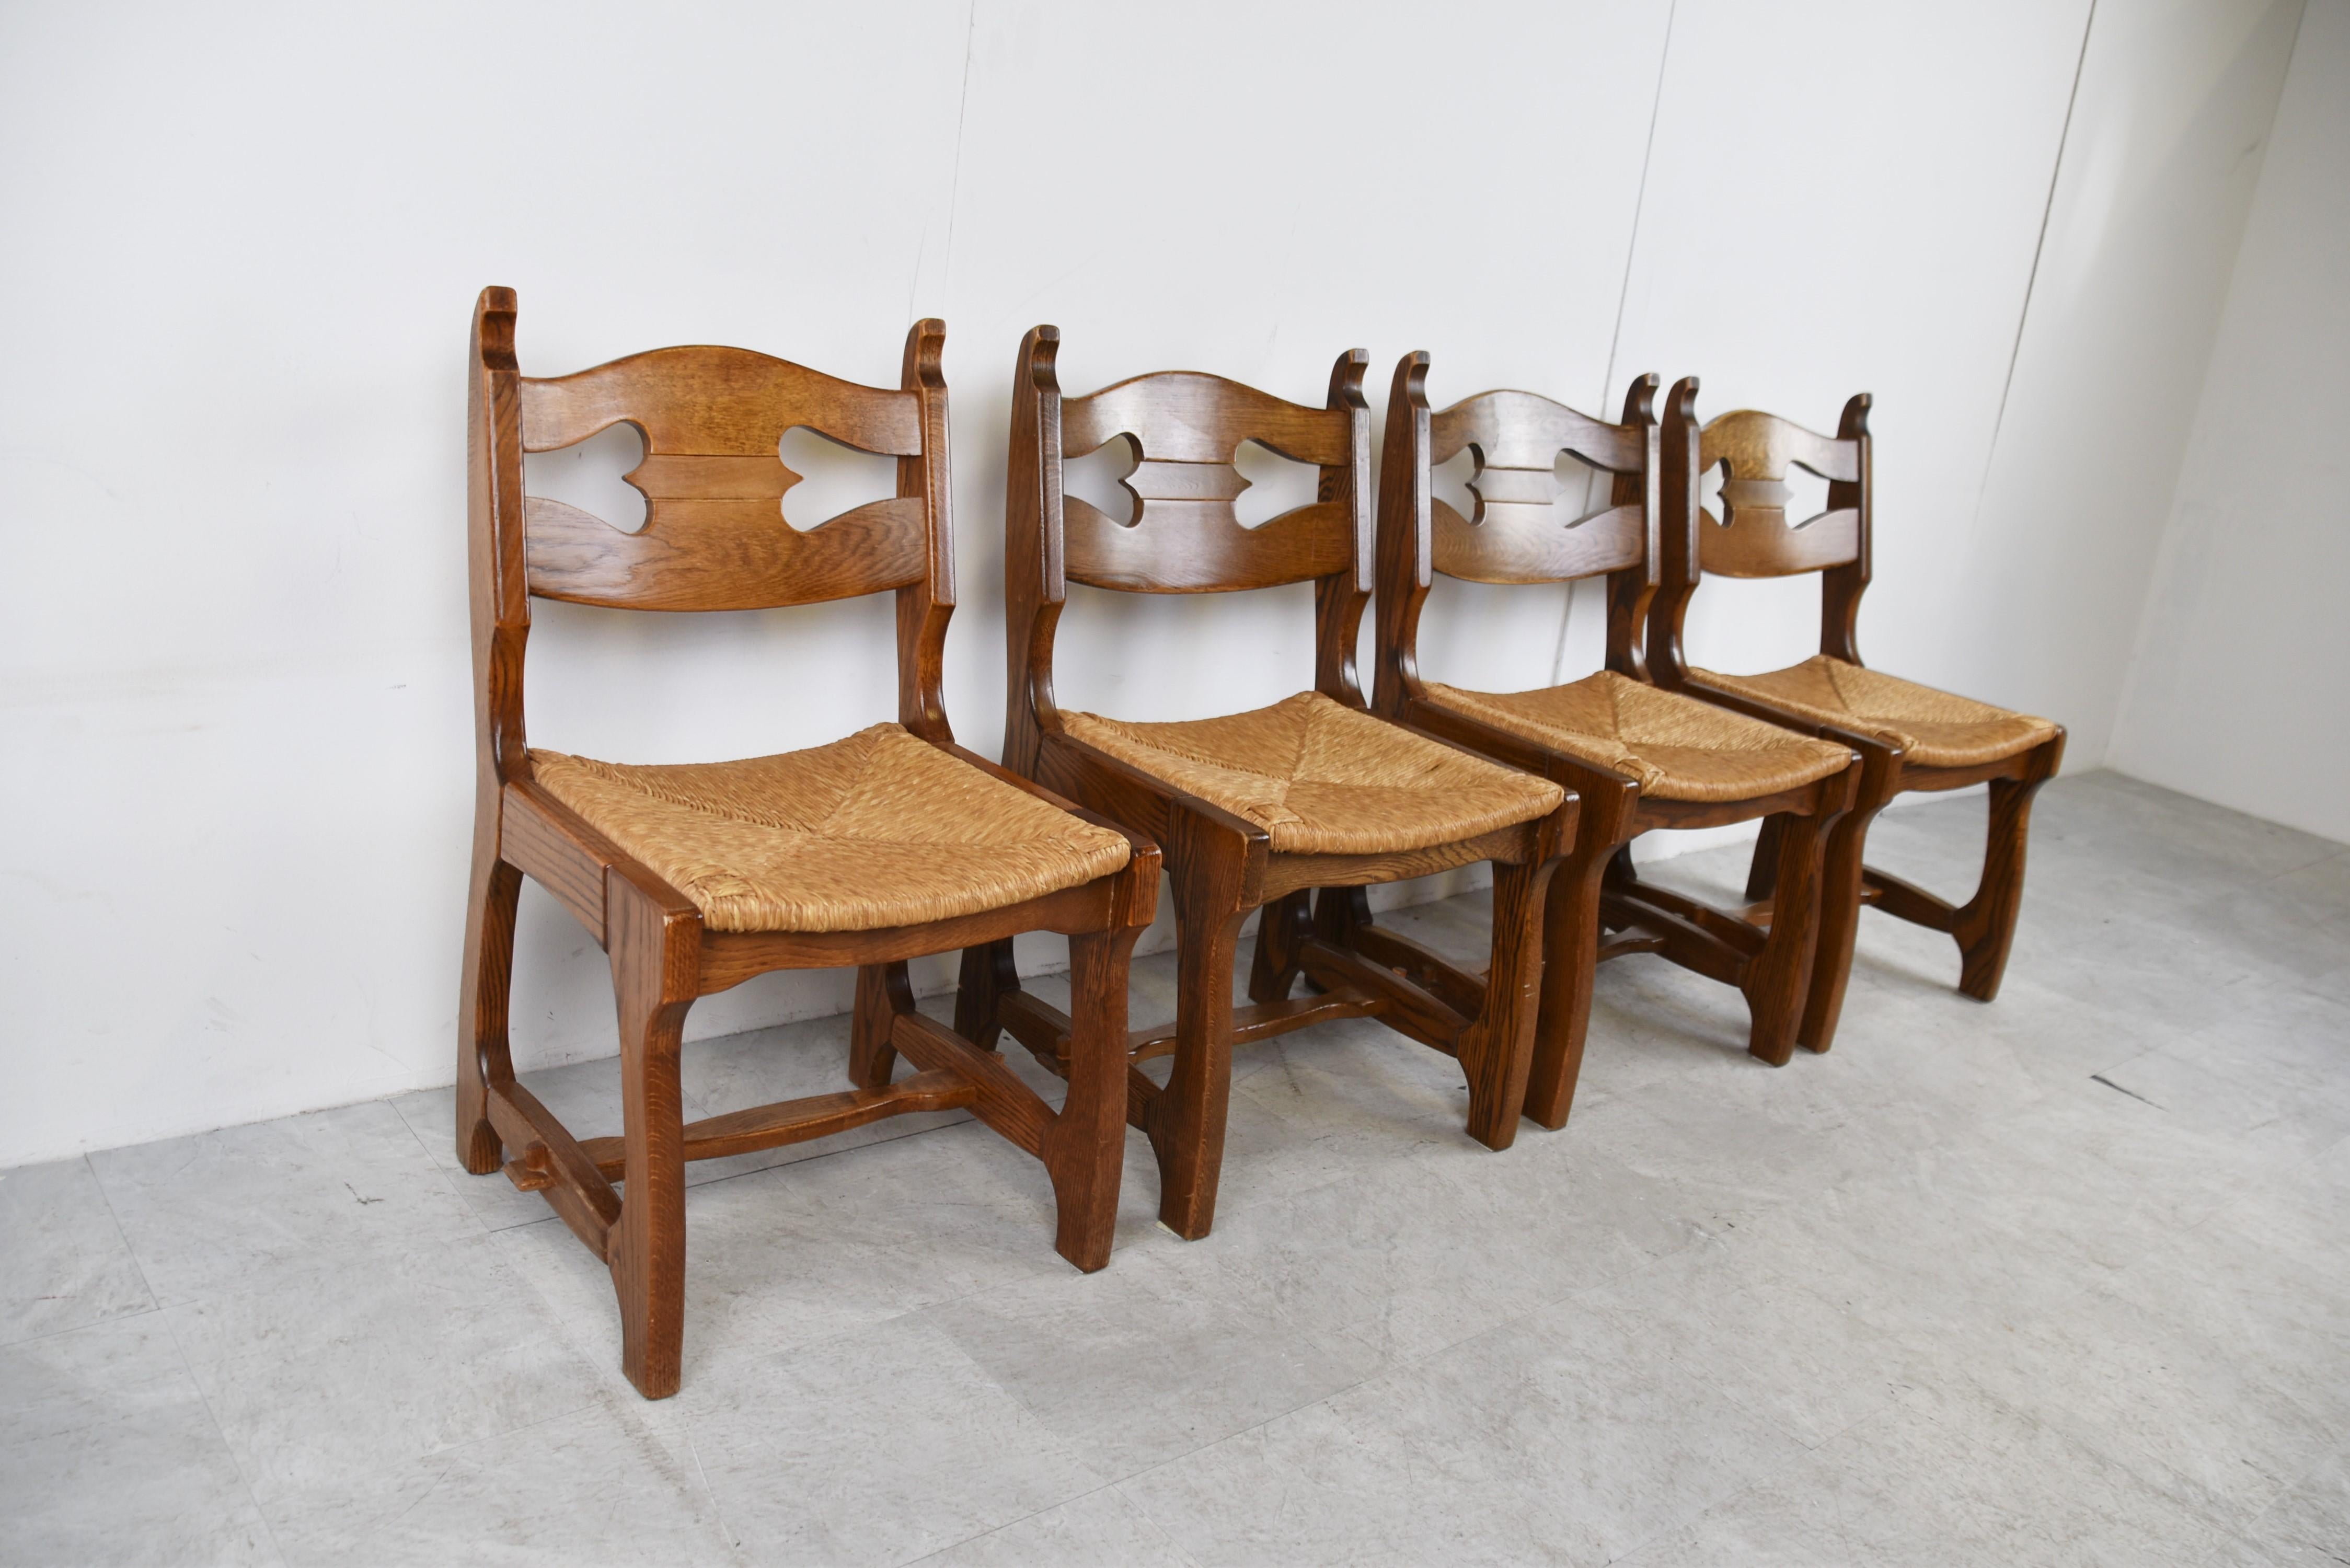 Vintage Oak and Wicker Brutalist Dining Chairs, 1960s For Sale 7